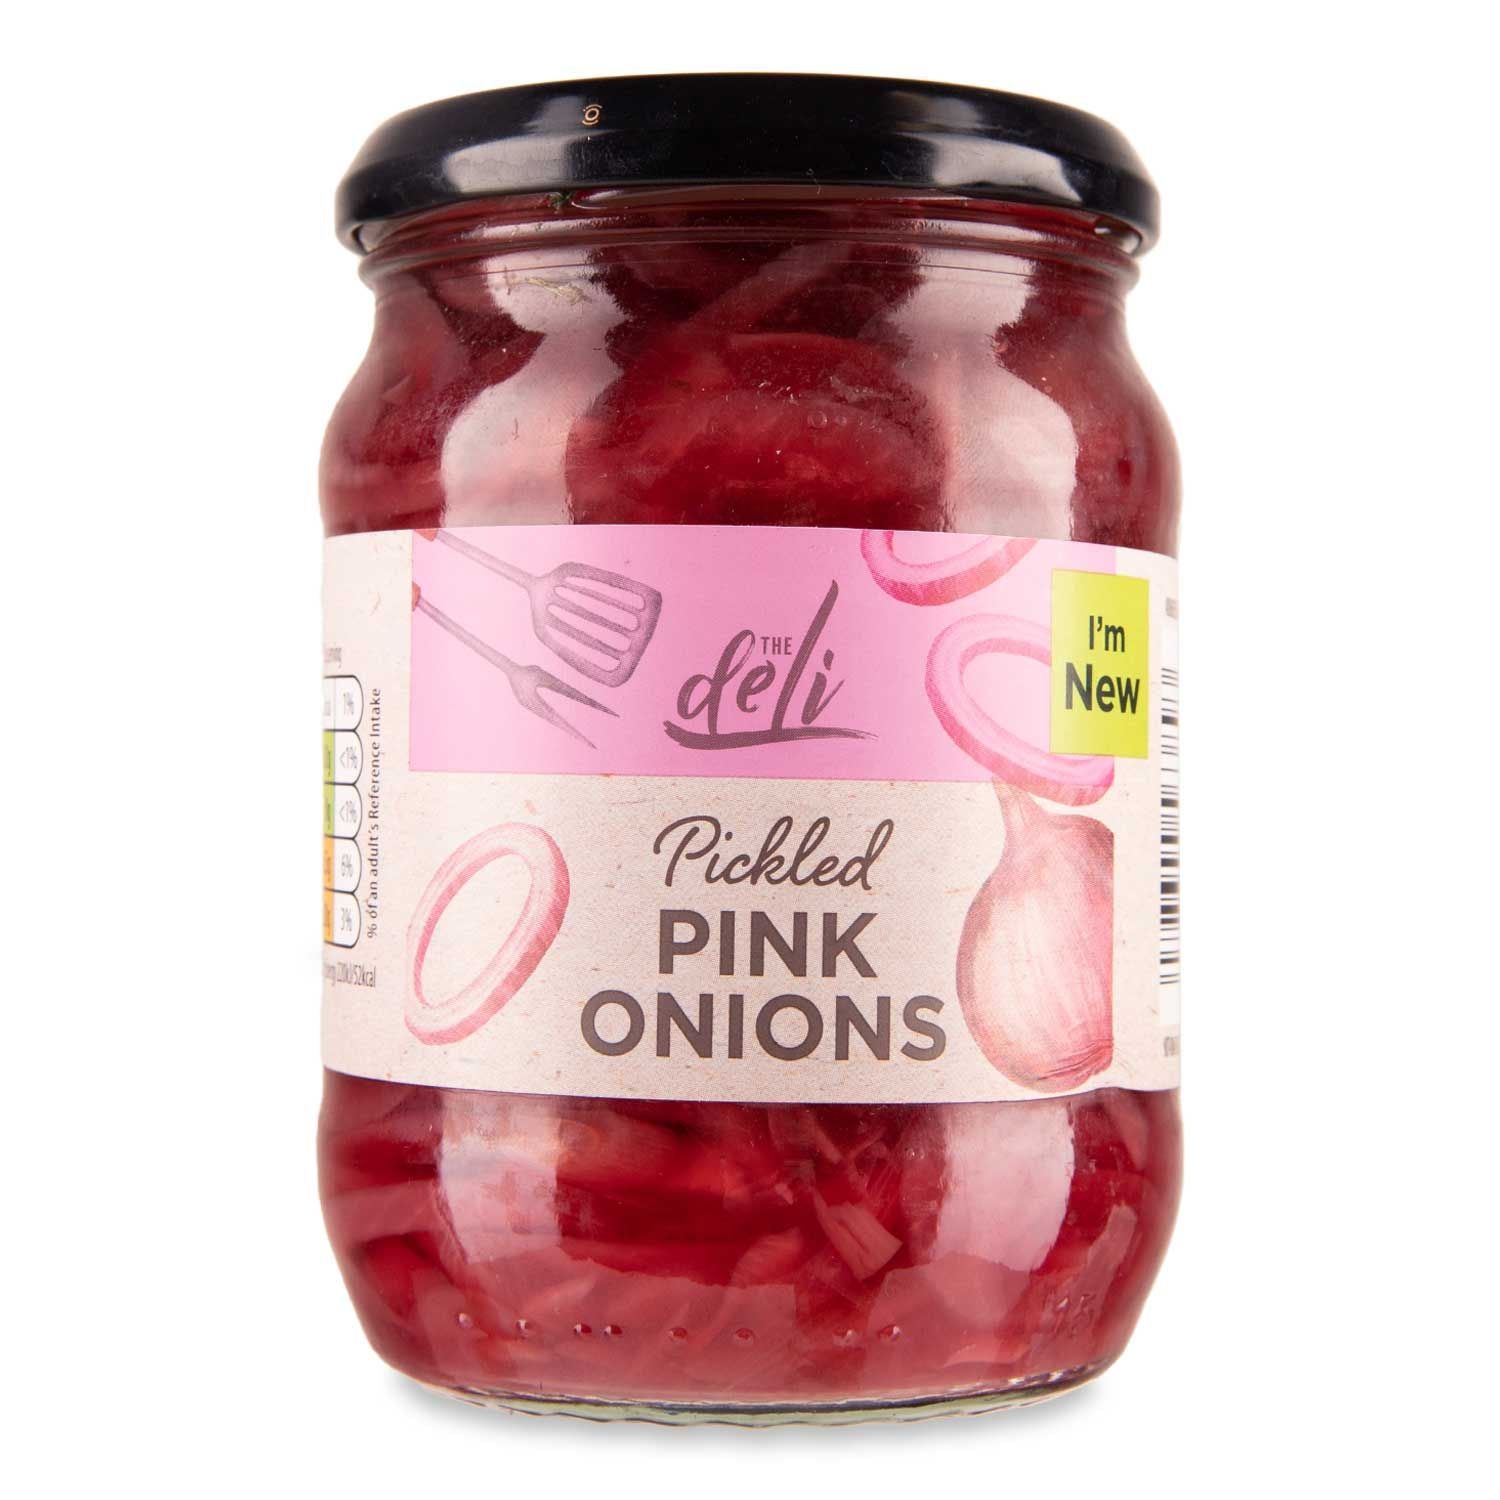 The Deli Pickled Pink Onions 340g (156g Drained)